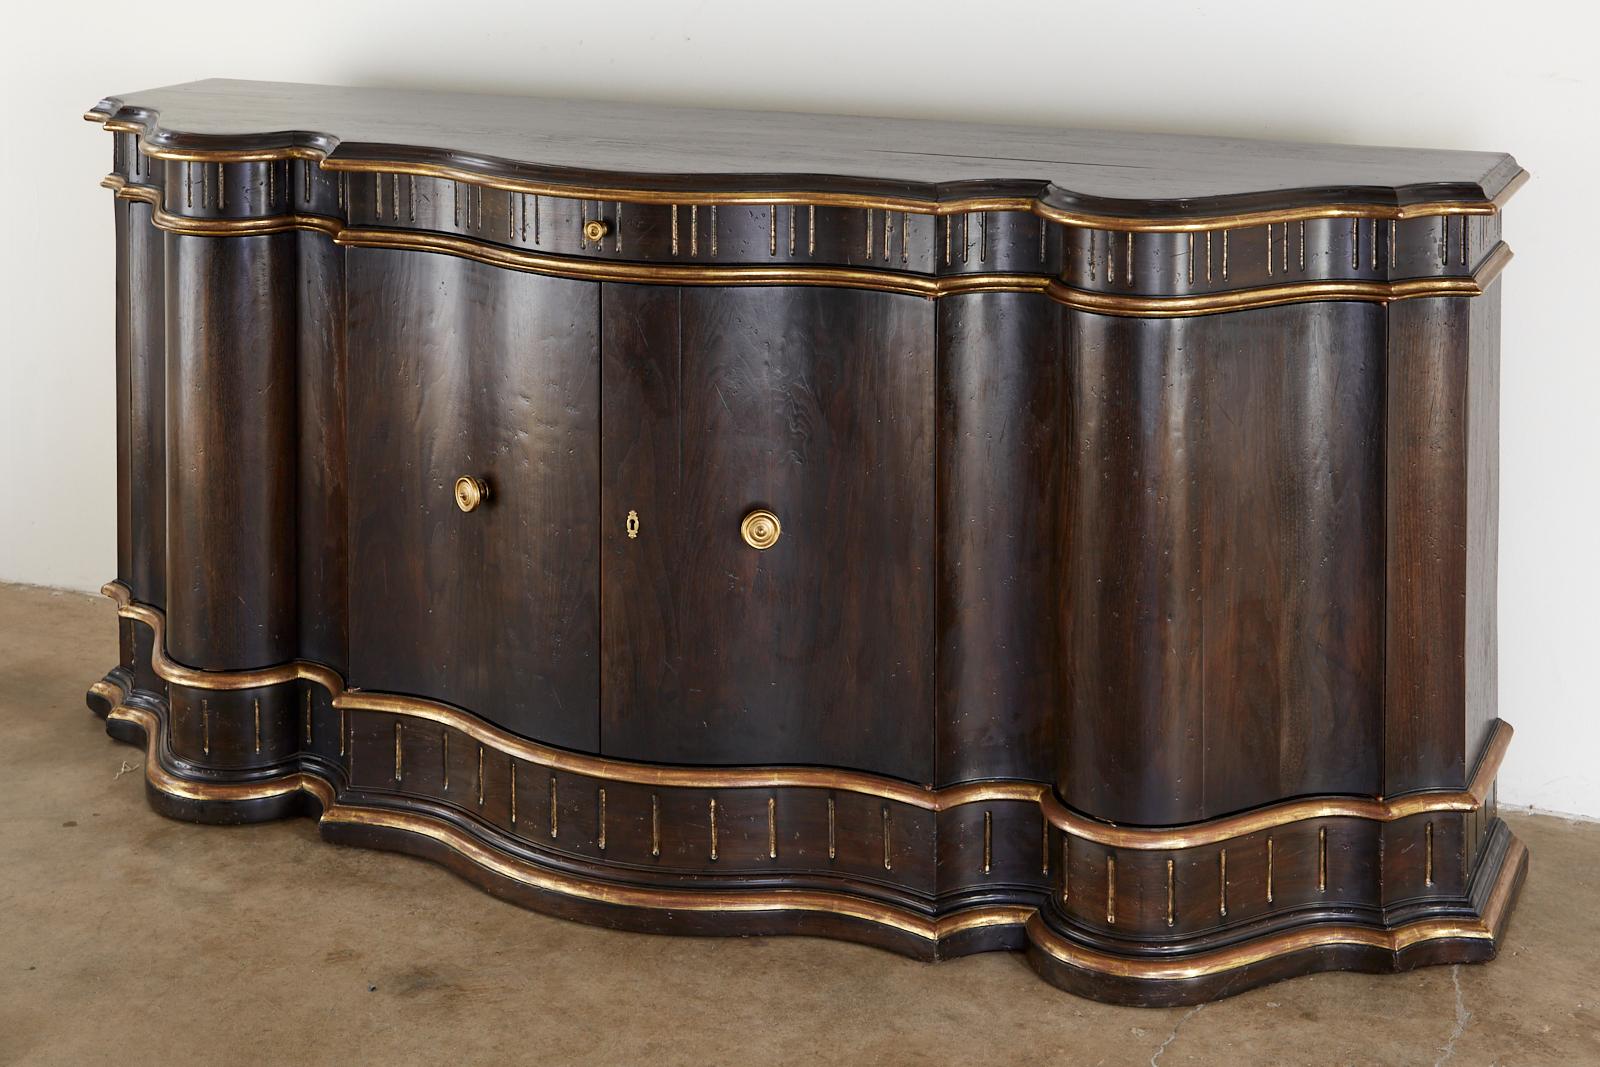 Dramatic ebonized walnut sideboard or buffet by Holly Hunt for Therien studio workshop. Features a large serpentine case in a dark patina with a parcel gilt finish. Bespoke piece made for an estate in Atherton, CA. Features two large doors in front